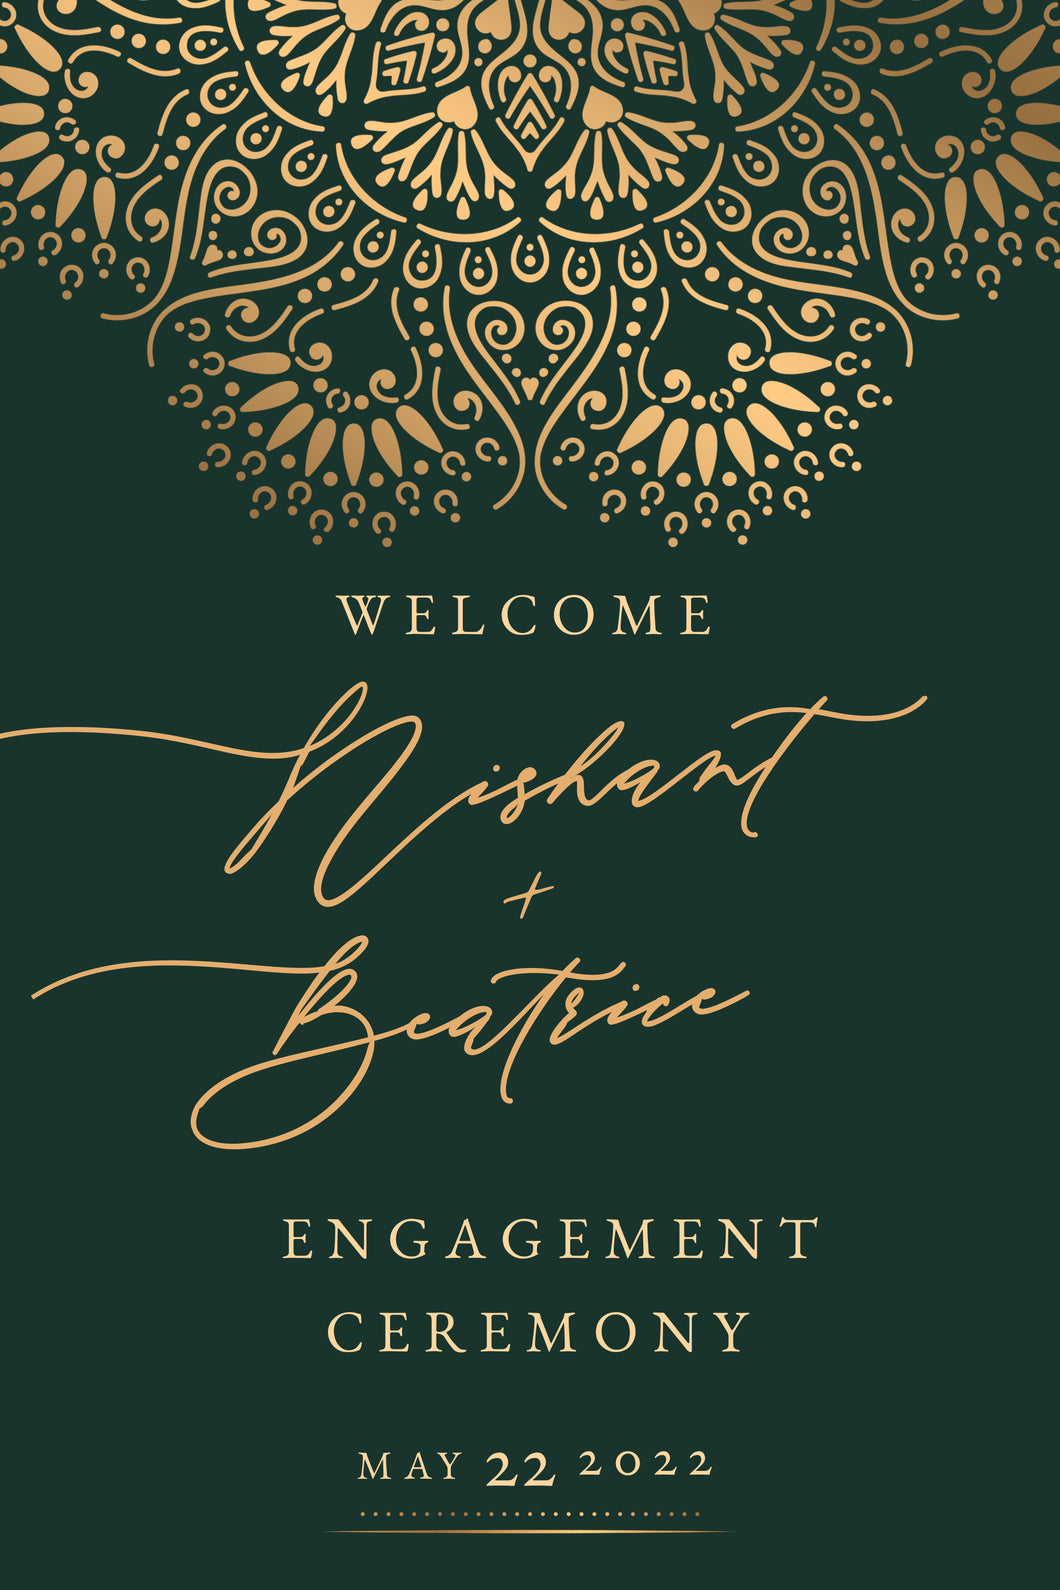 EVENT SIGN 001